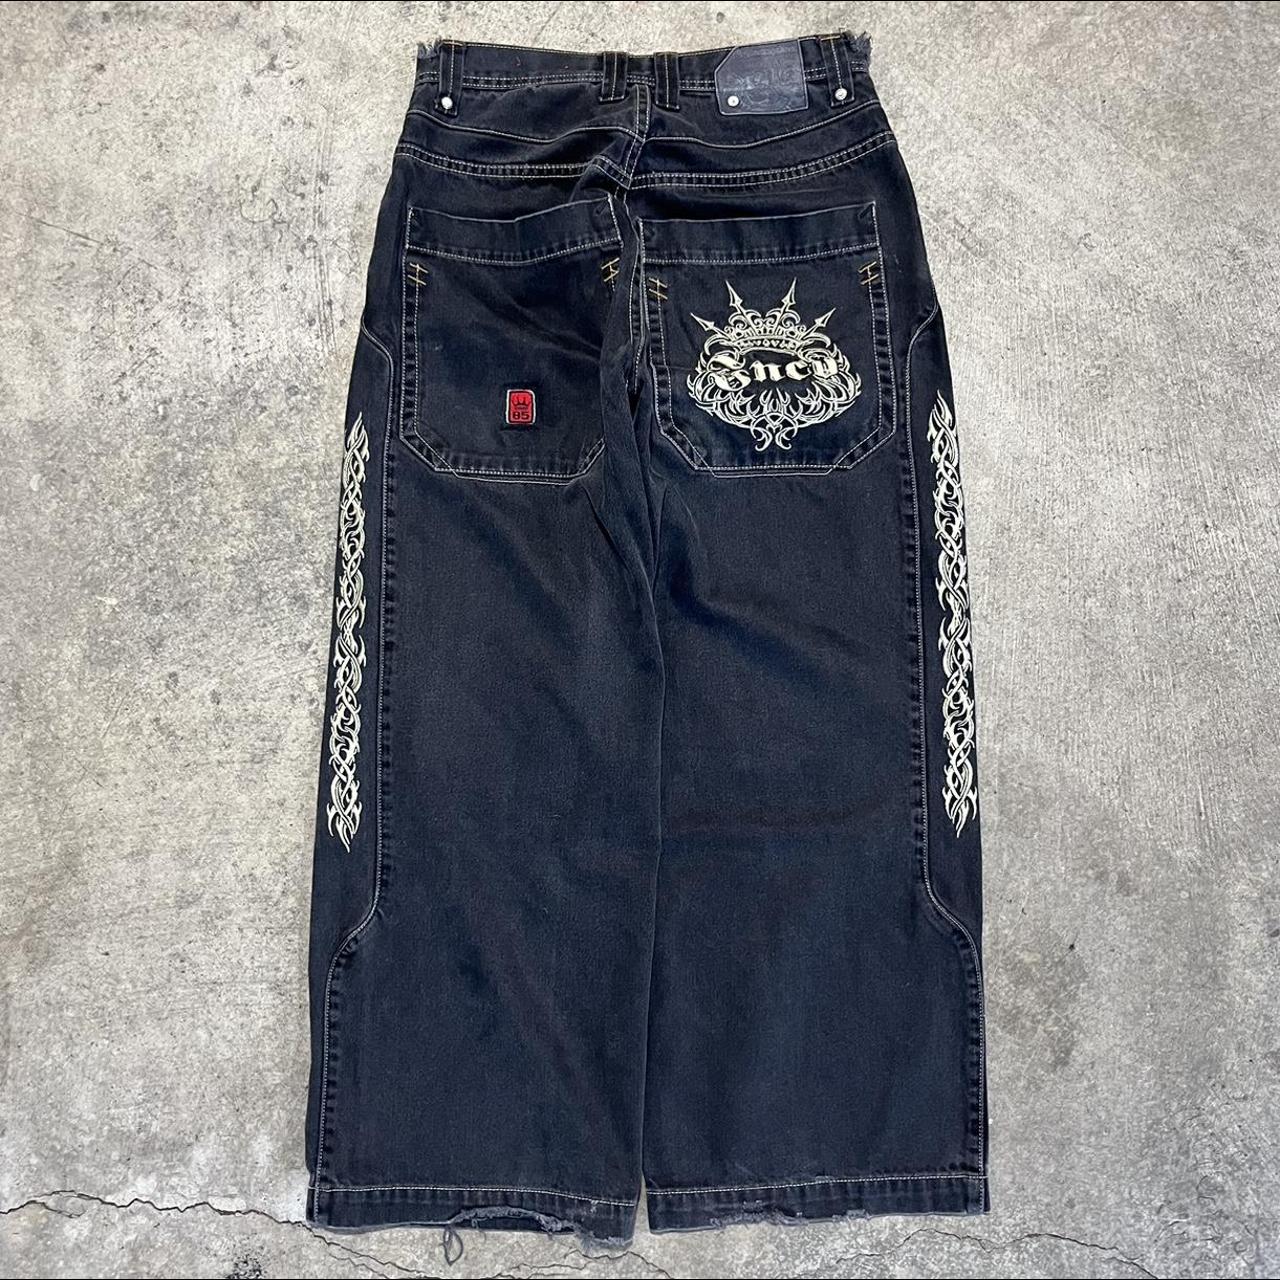 Jnco Barbwire Pants Crazy embroidery! Super rare!... - Depop